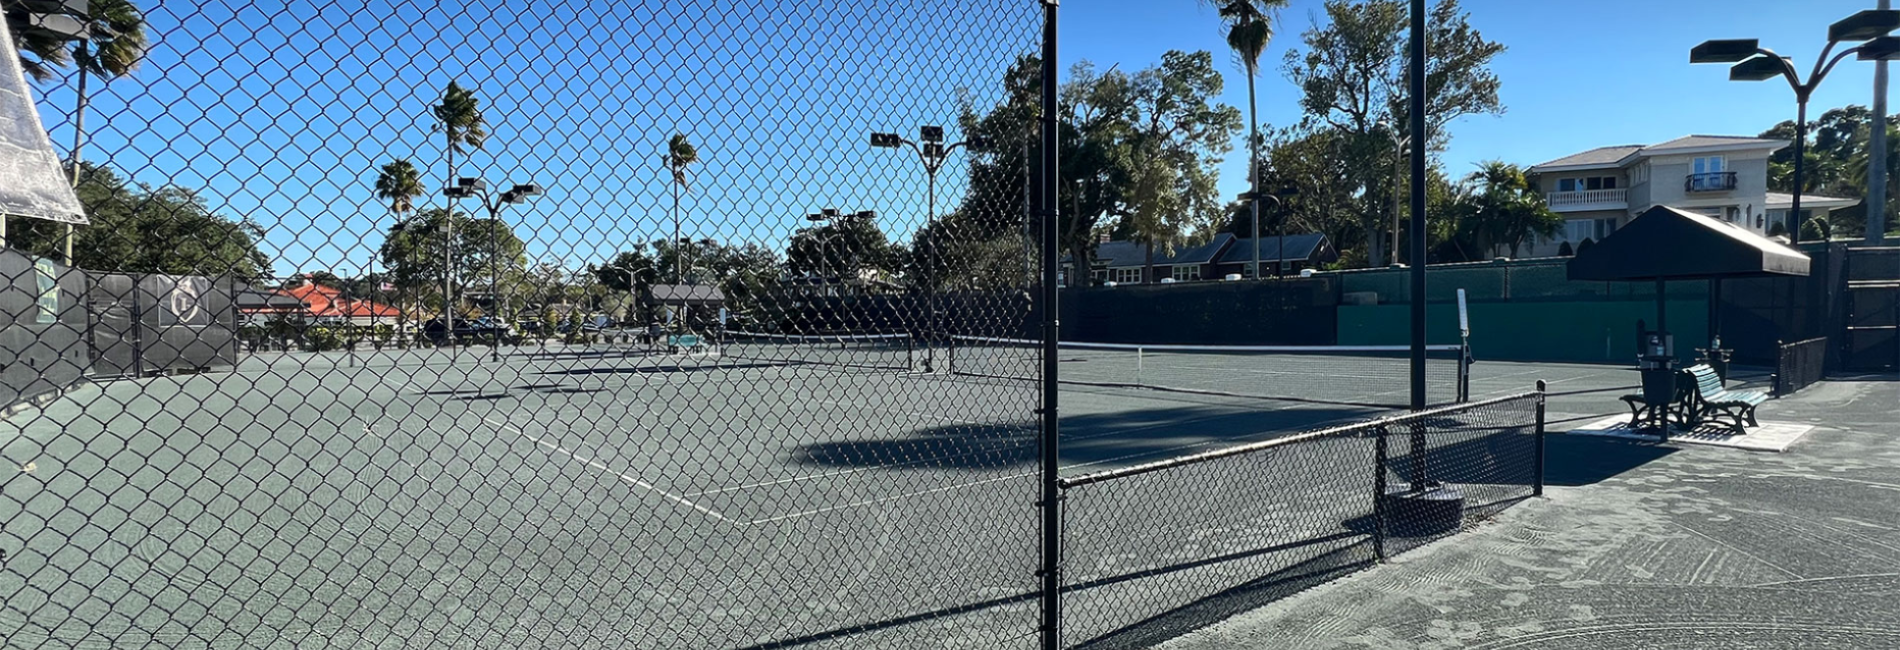 black round fence in use at a tennis court